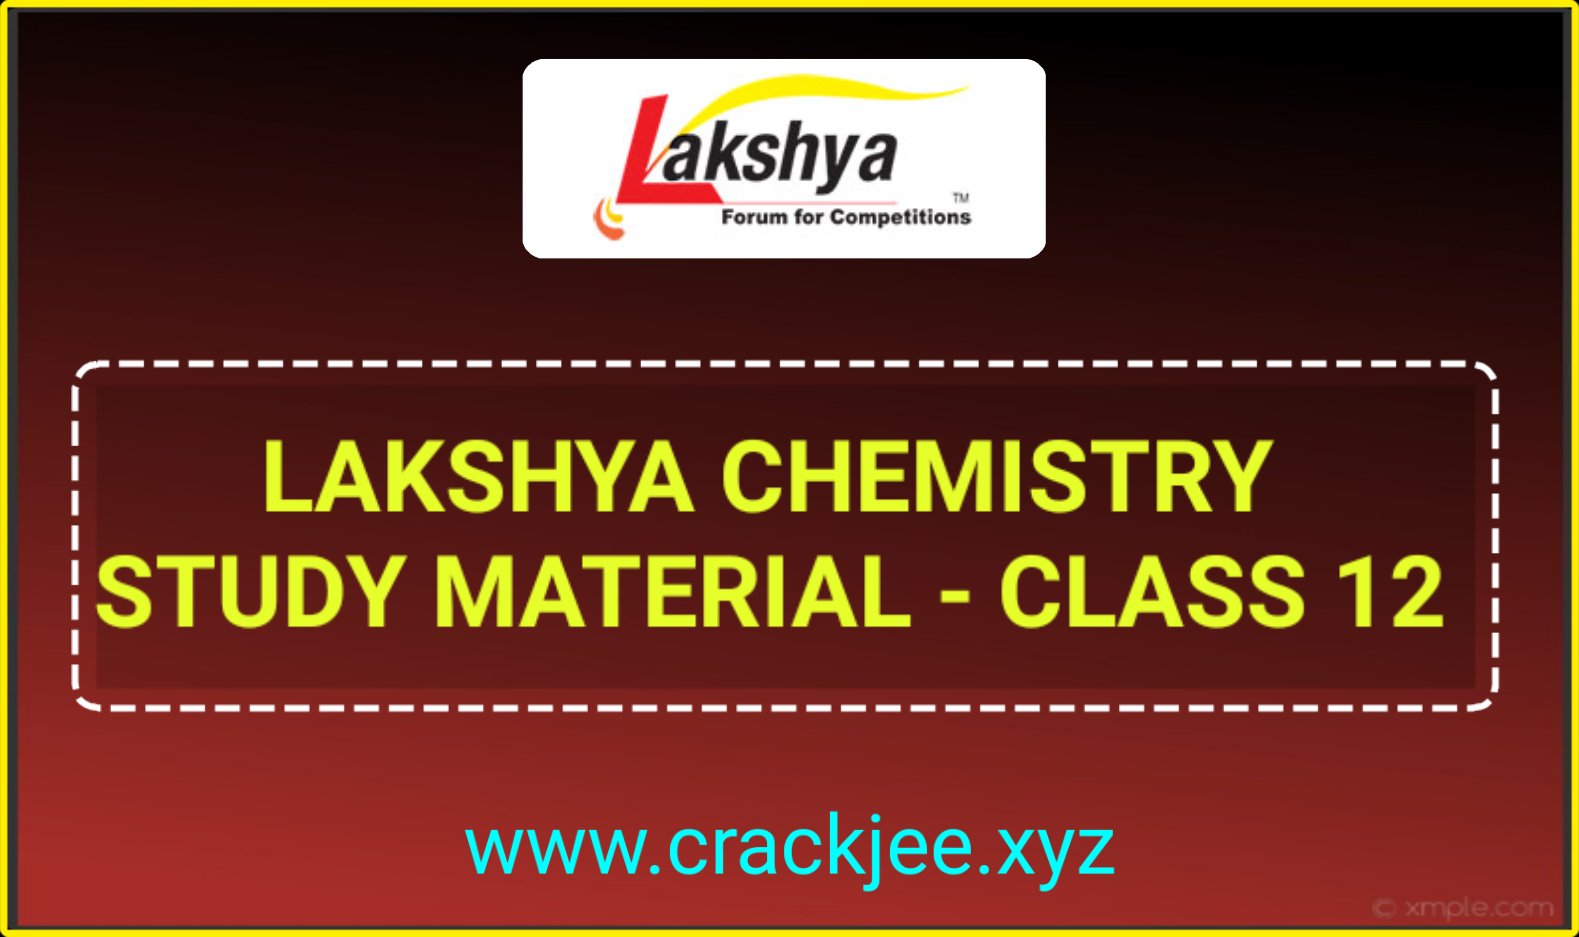 Lakshya Robomate Class 12 Chemistry Study Material